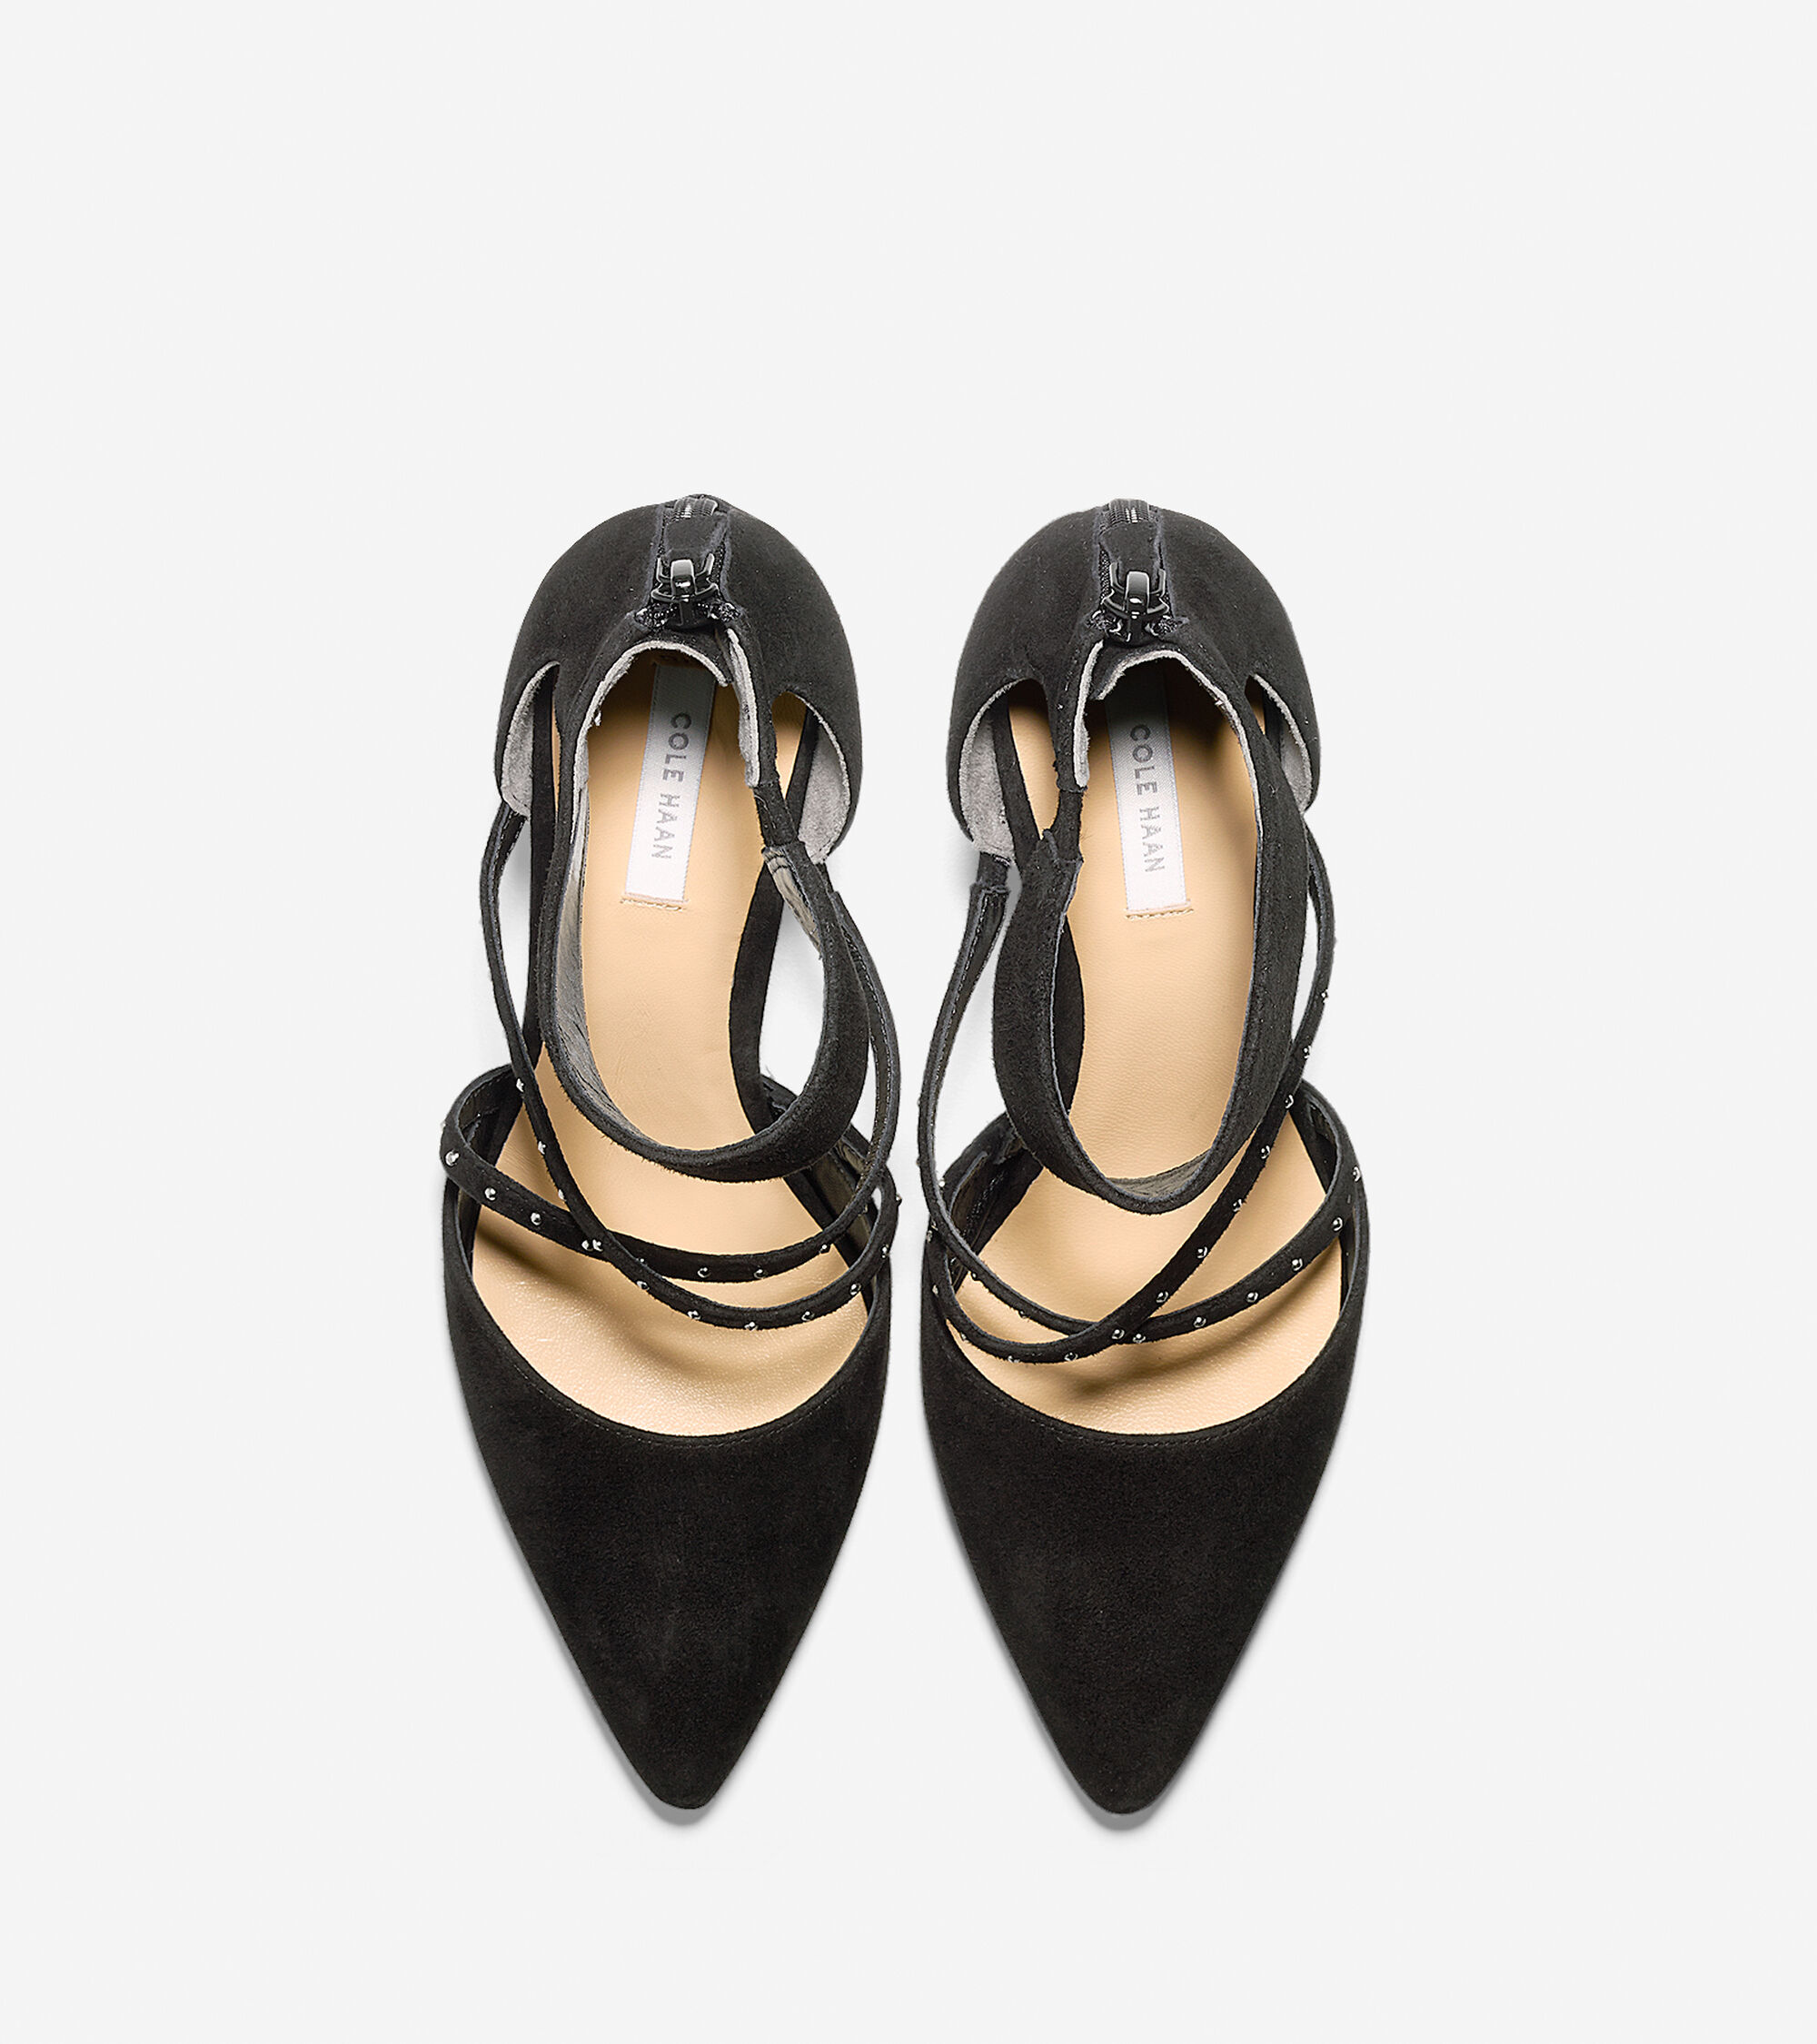 Trella Pumps in Black Suede With Studs | Cole Haan